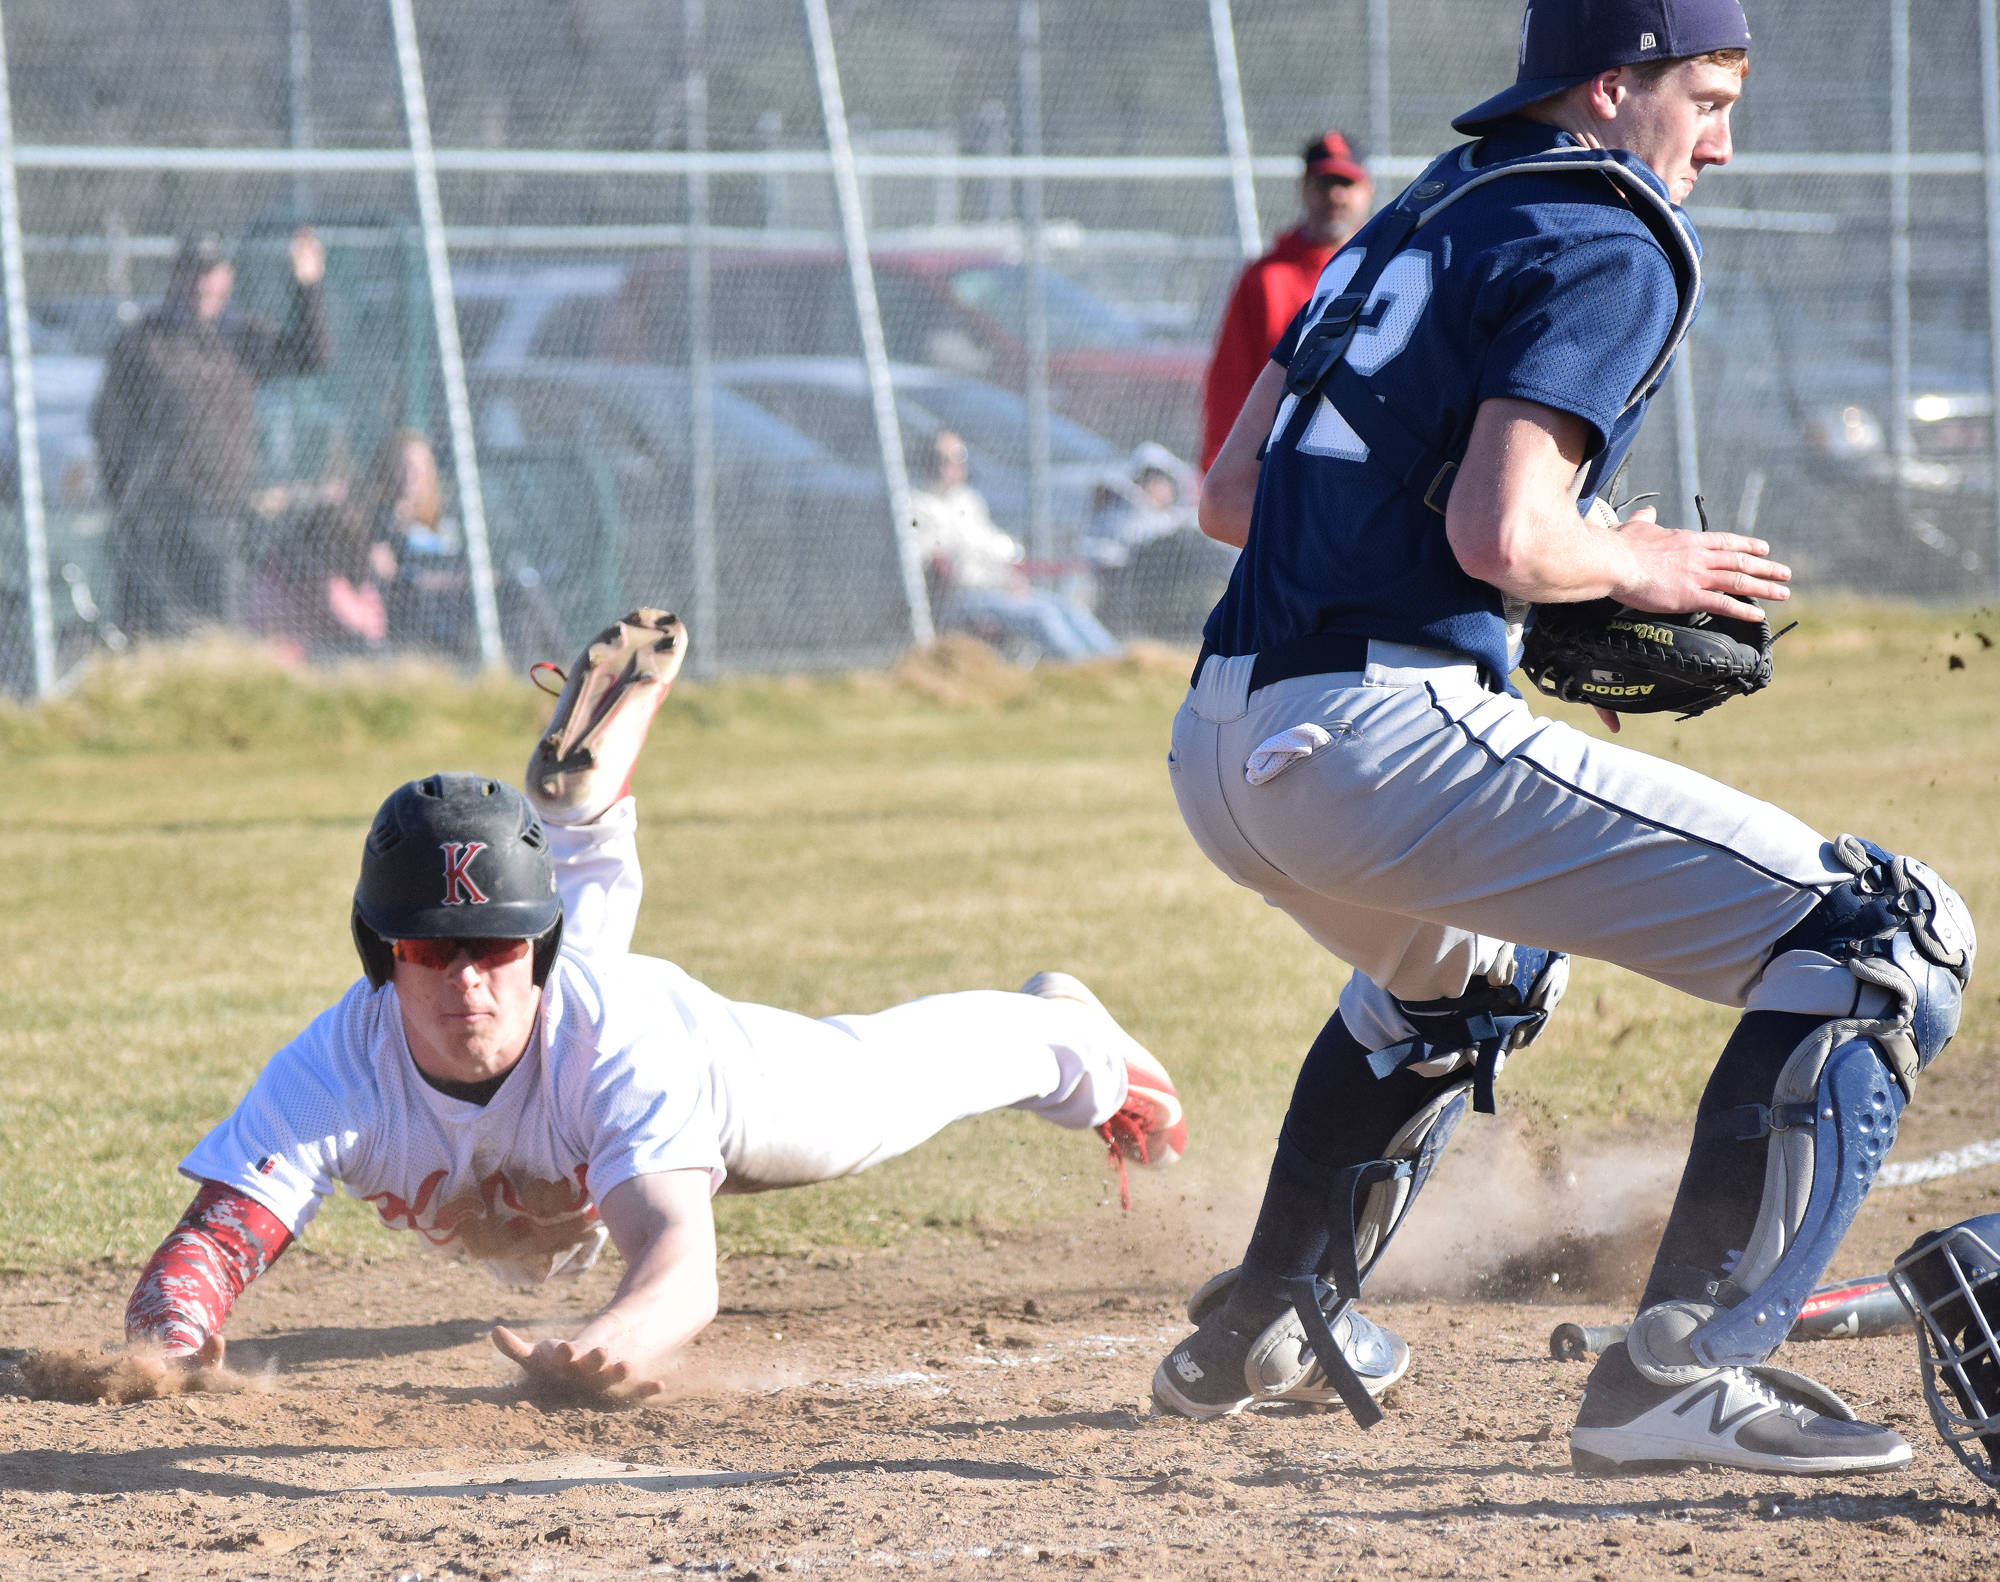 Kenai Central’s Paul Steffensen dives for home plate behind Soldotna catcher Cody Quelland to score a run in a high school contest May 10, 2017, at the Kenai Little League Fields. (Photo by Joey Klecka/Peninsula Clarion)